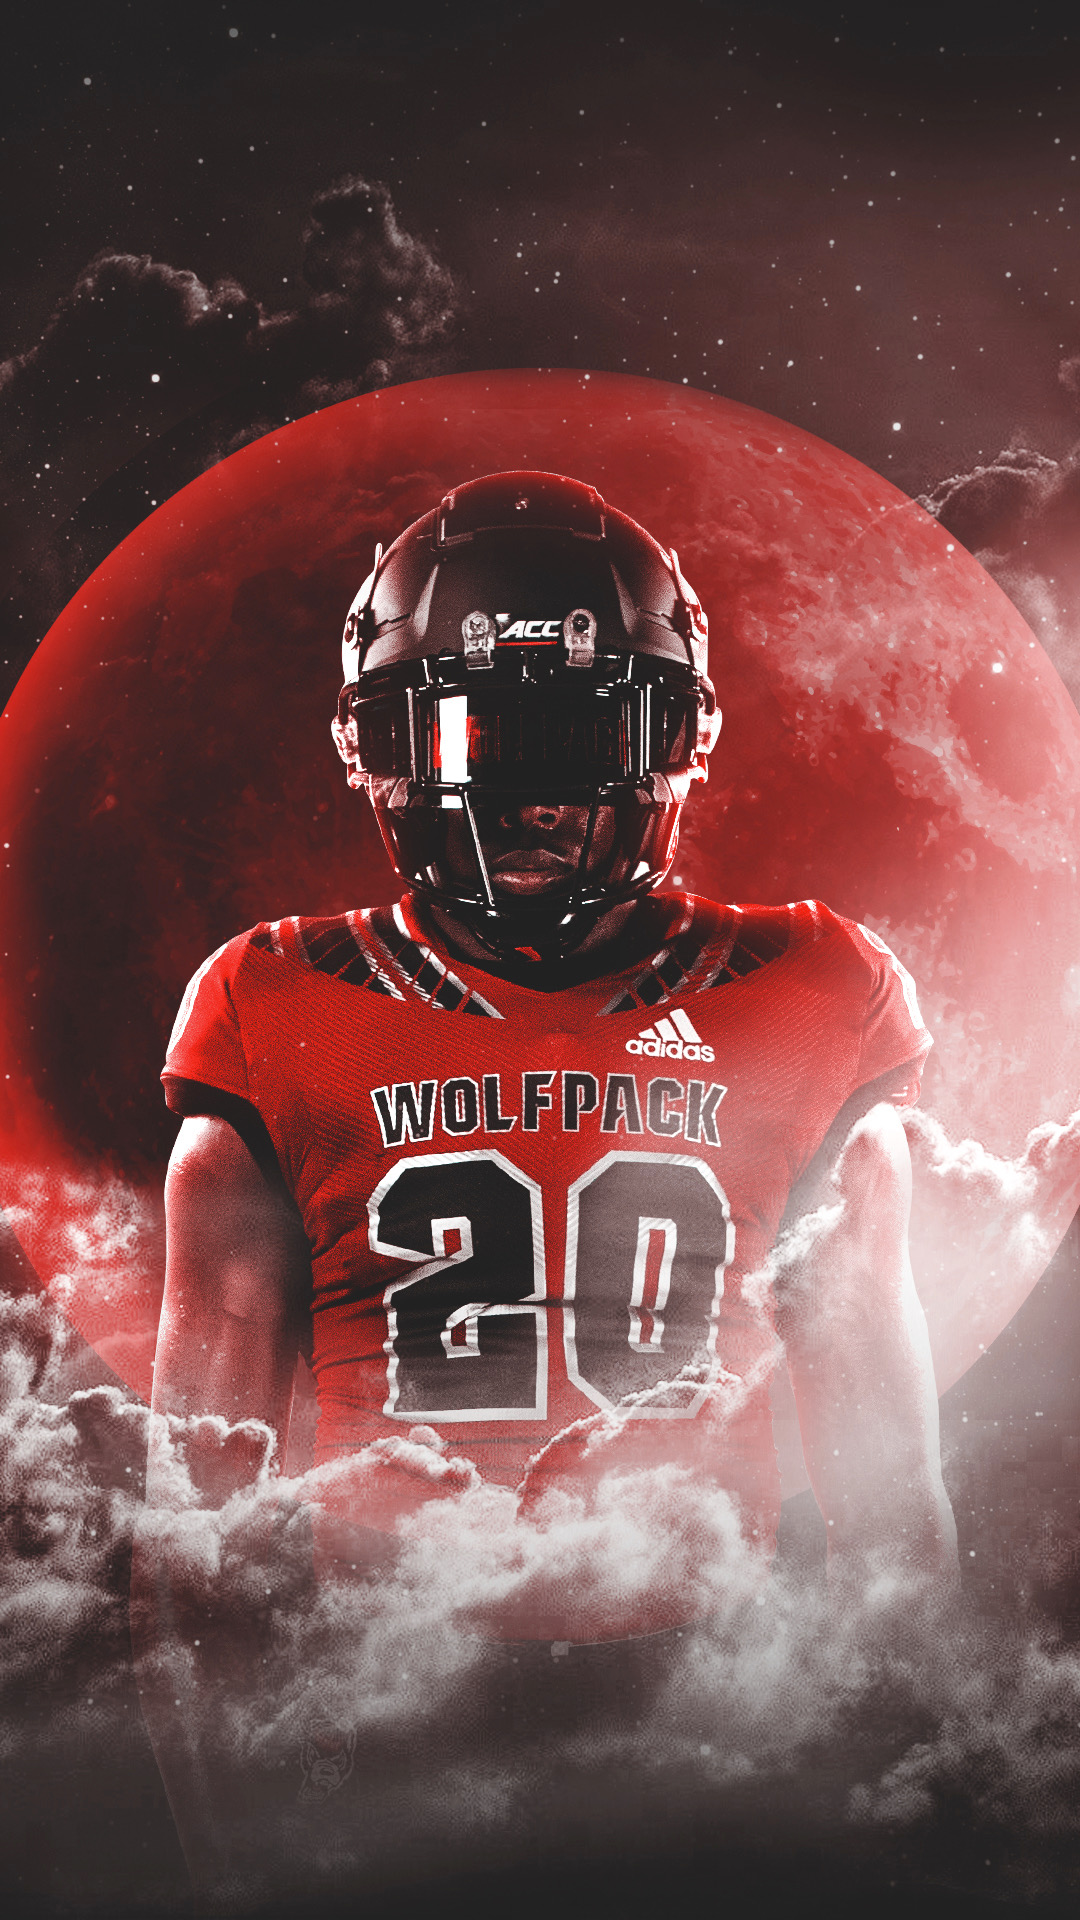 NC State Football you ready for the BLOOD MOON? #WallpaperWednesday